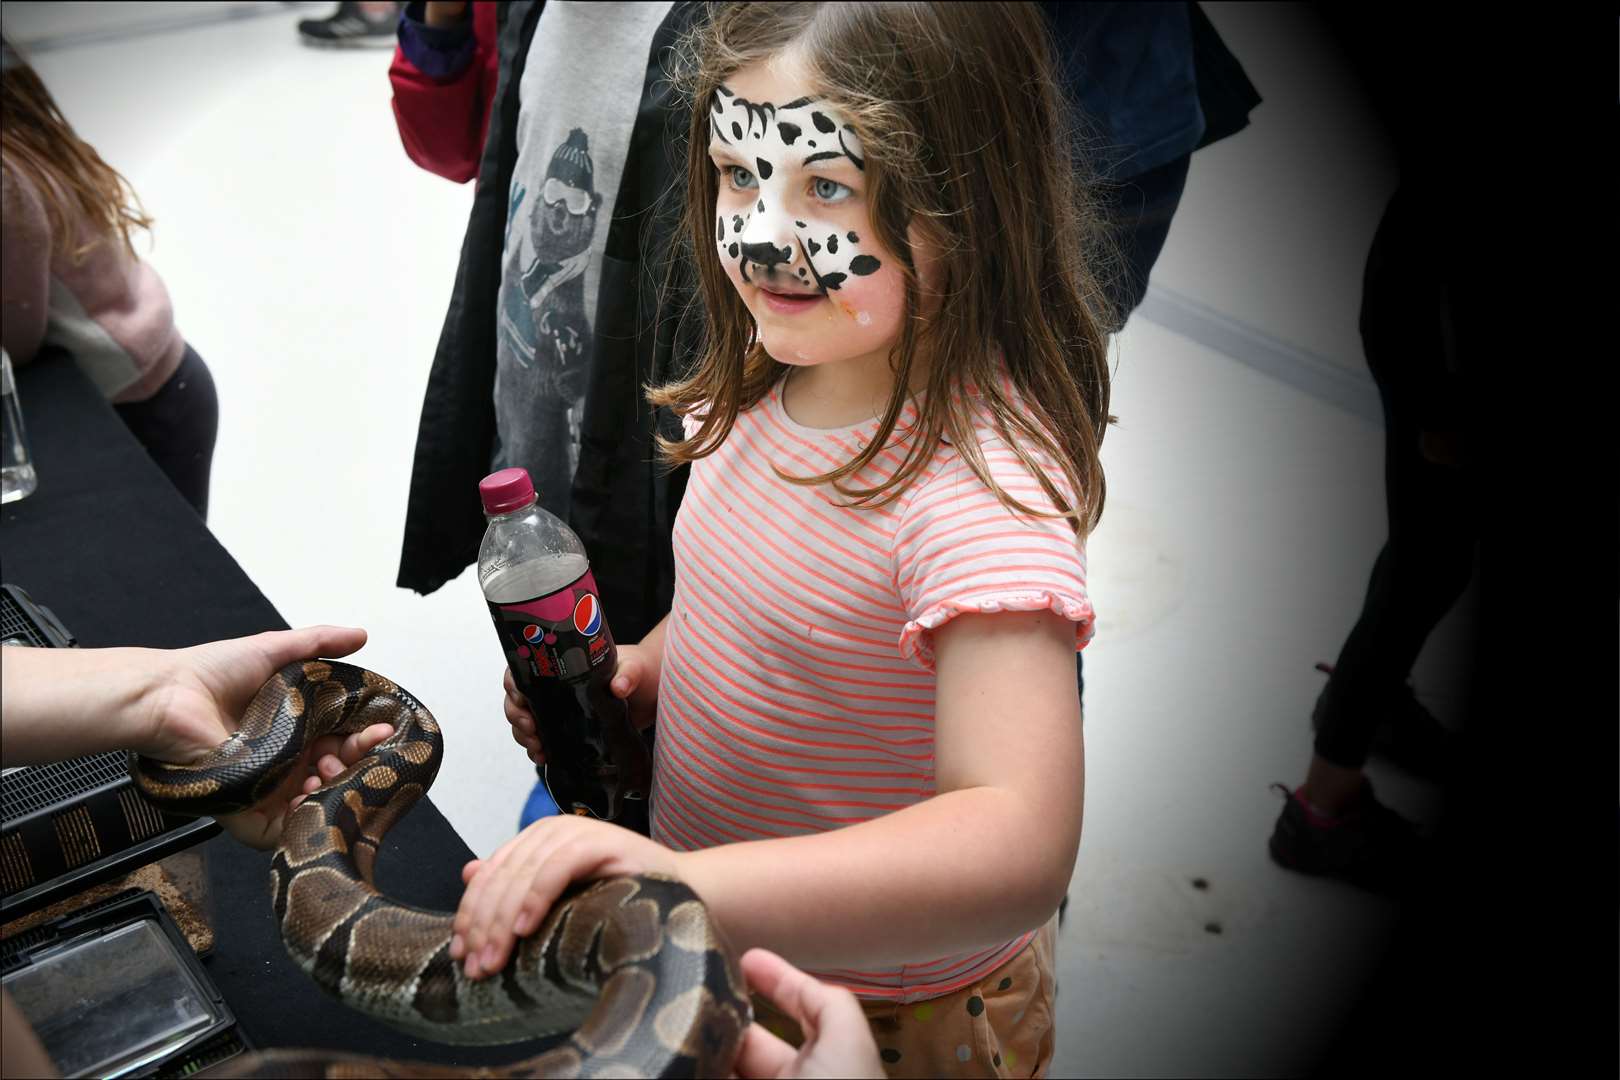 Getting to know Splat the royal python.